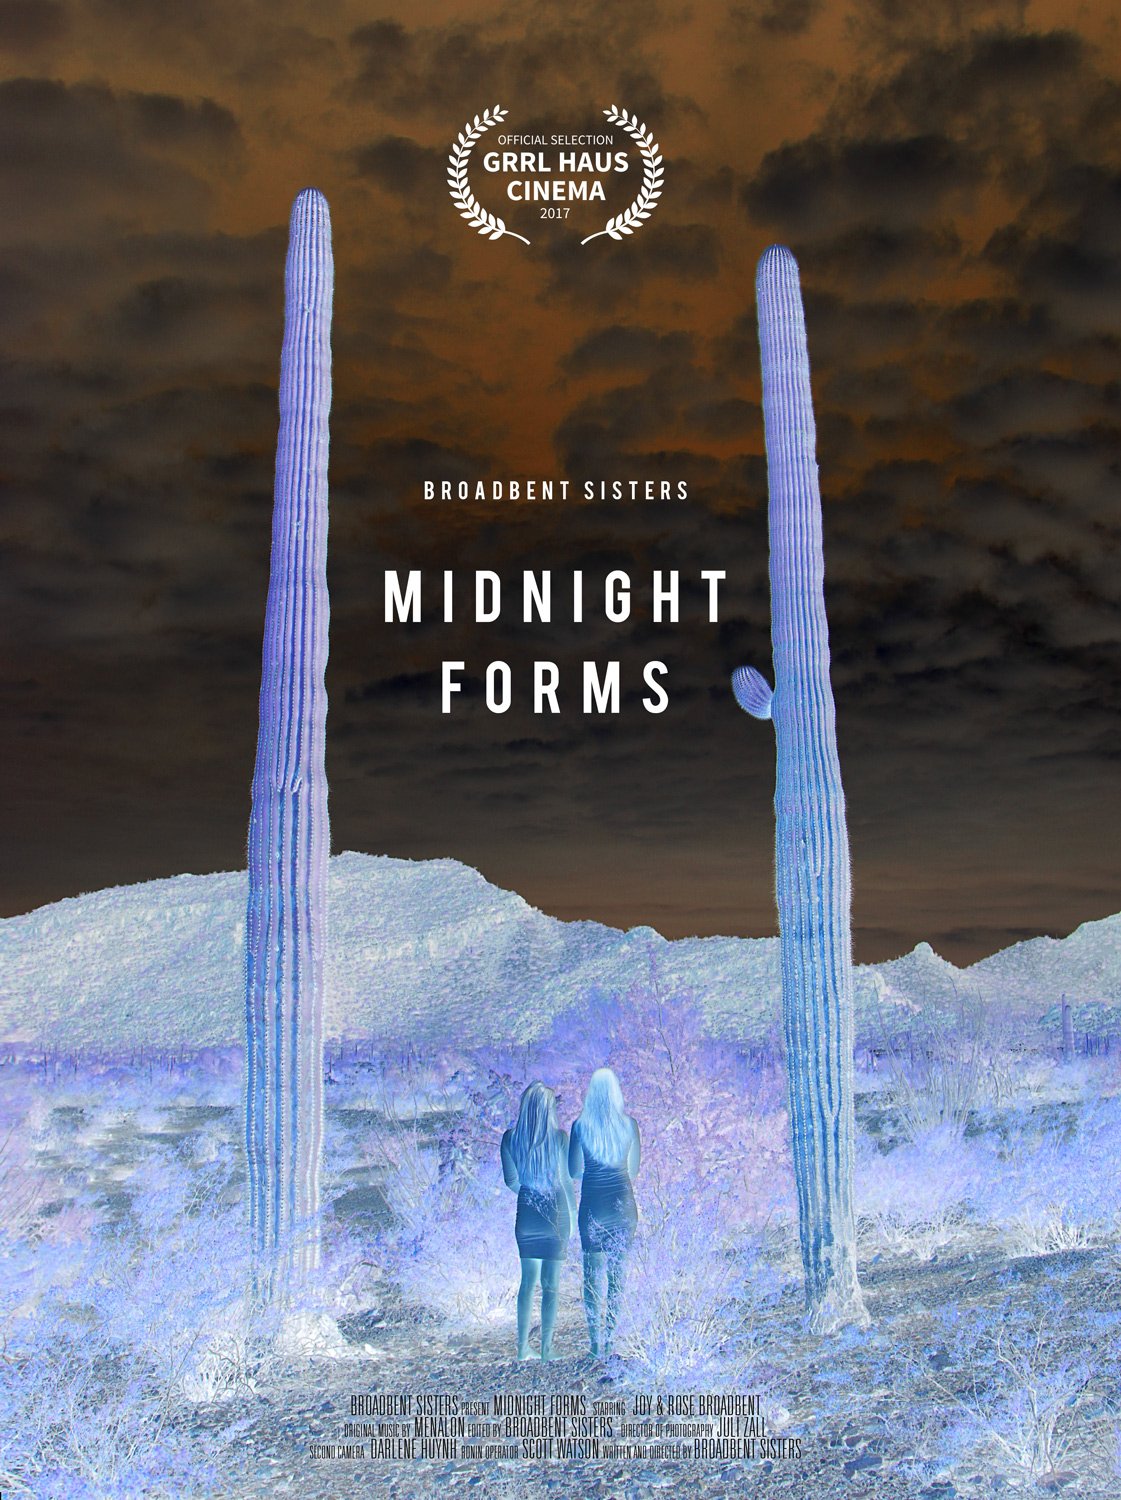 Midnight Forms - A Short Film by the Broadbent Sisters